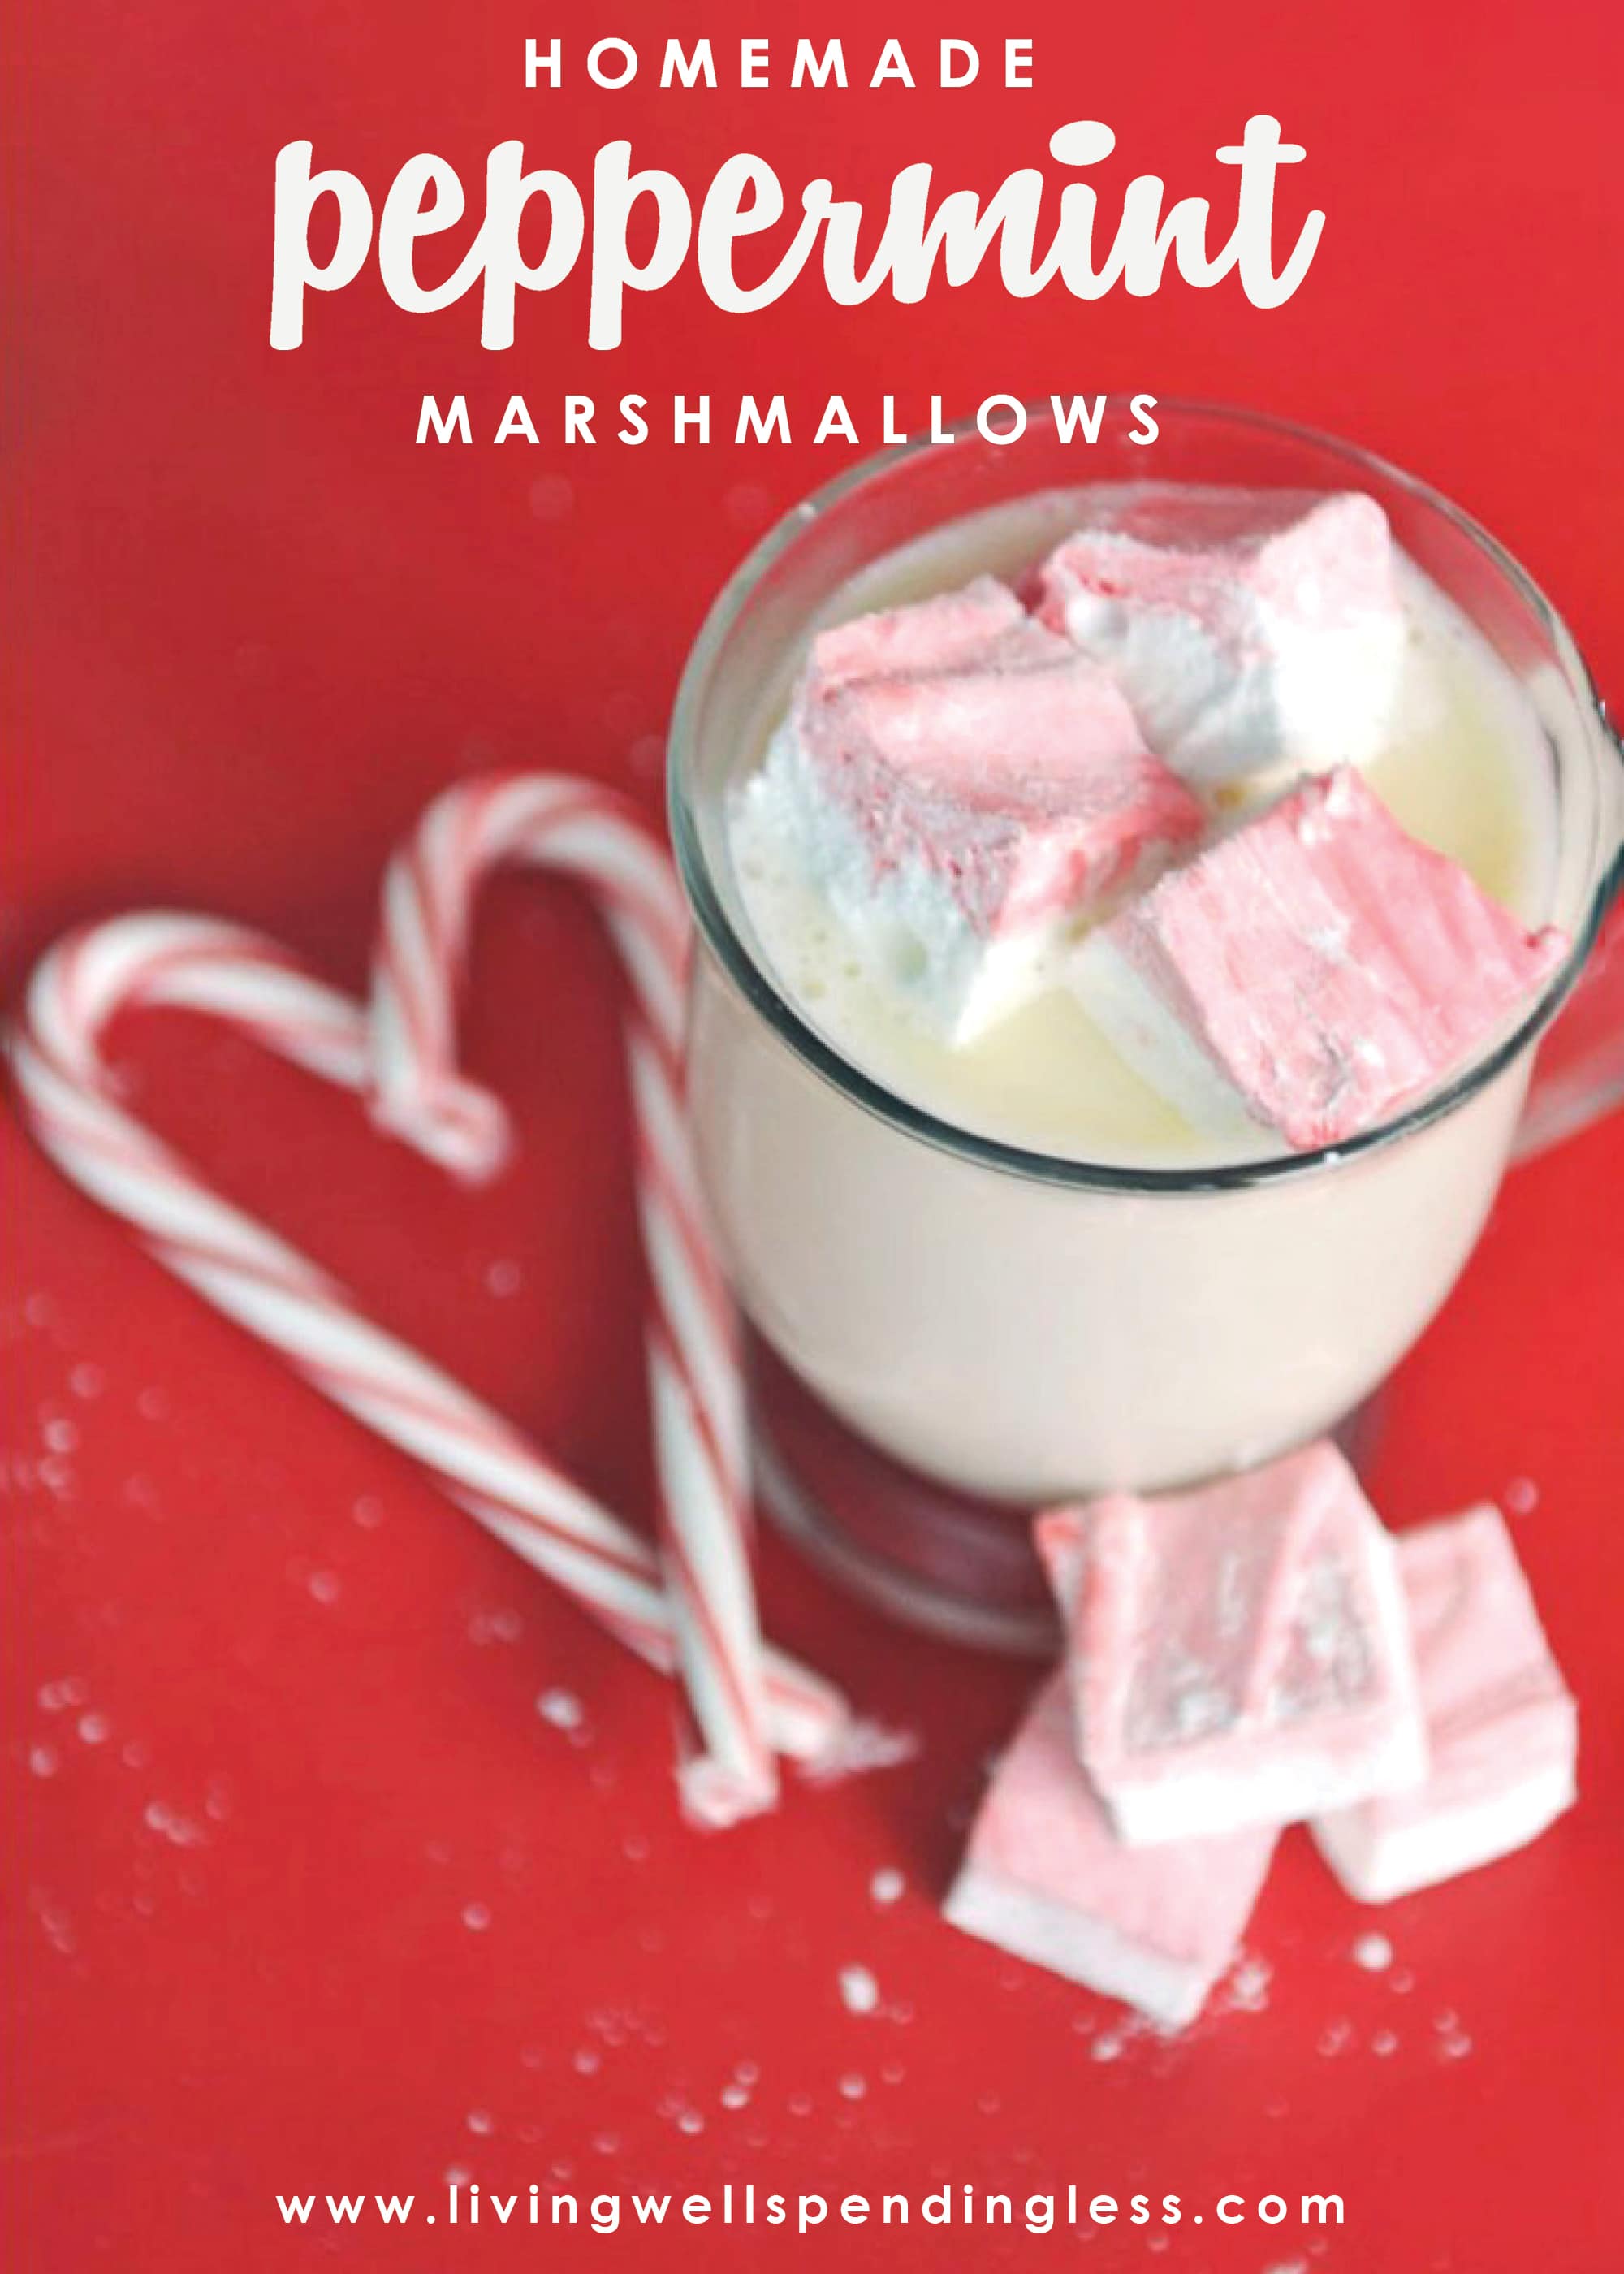 These homemade peppermint marshmallows are a fun twist on the ordinary marshmallow. The perfect addition to a cup of hot chocolate.